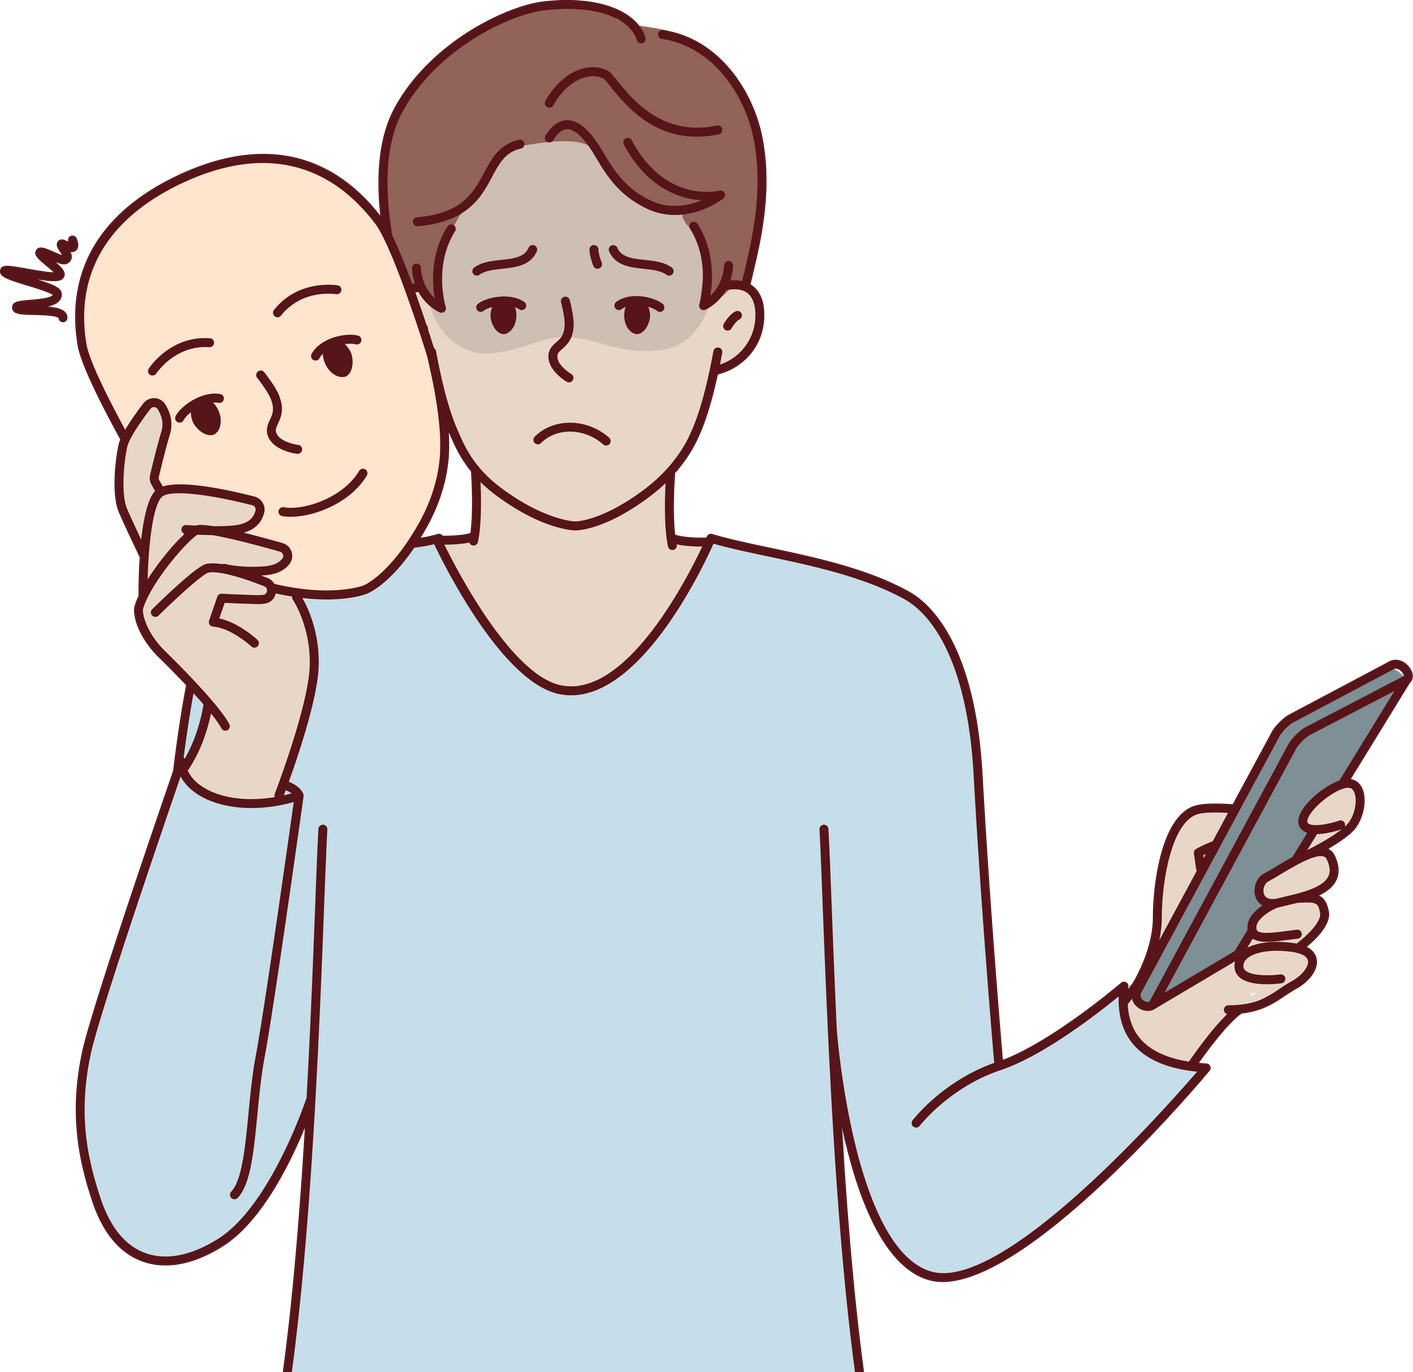 Unhappy Man with Phone Uses Mask to Pretend to Be Positive Human during Online Dating. Vector Image